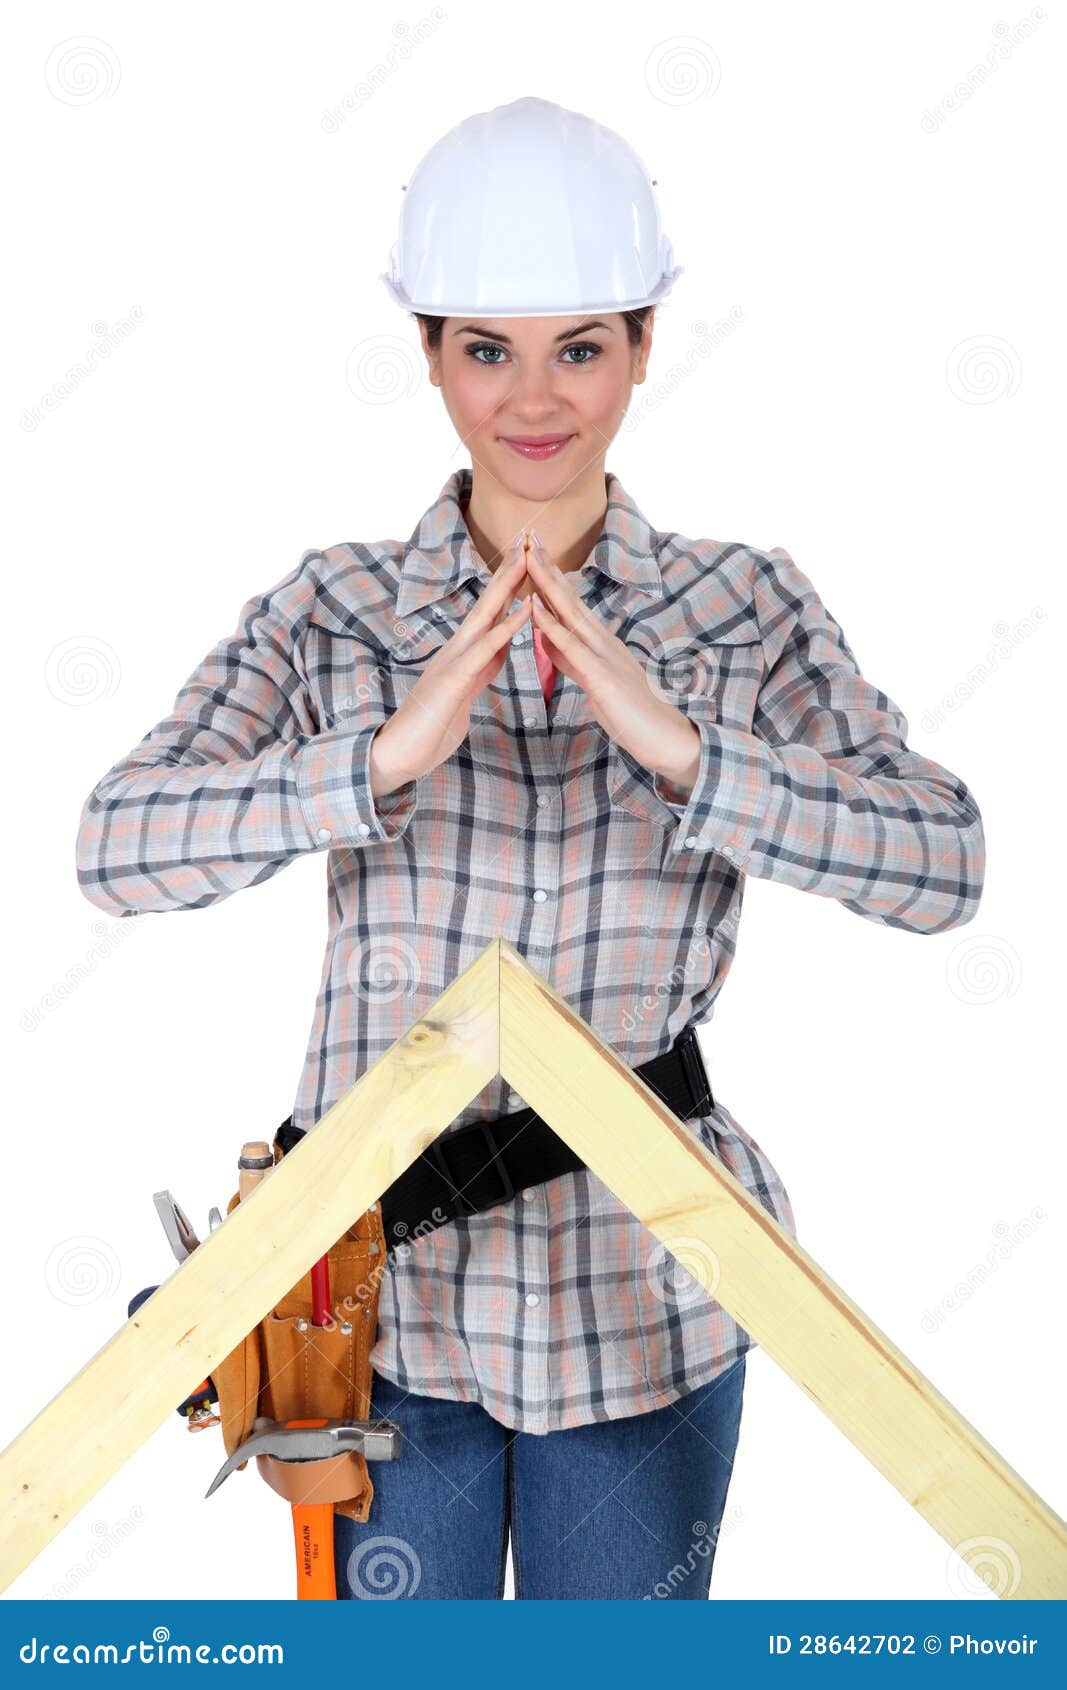 female builder with a timber apex